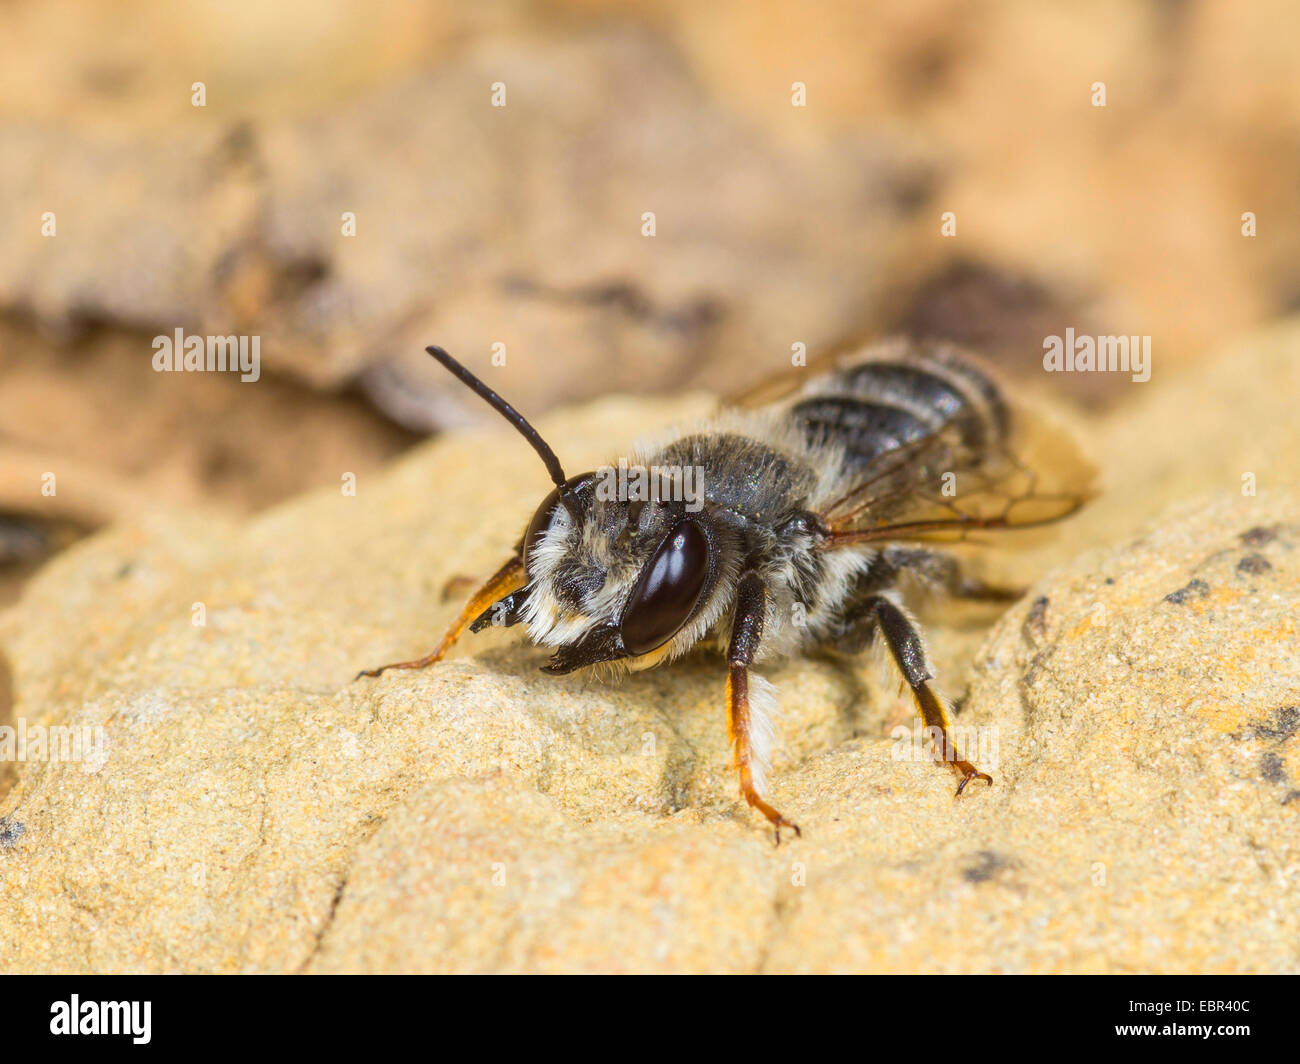 Leafcutter bee, Leafcutter-bee (Megachile ericetorum, Chalicodoma ericetorum, Pseudomegachile ericetorum), male sitting on a stone, Germany Stock Photo